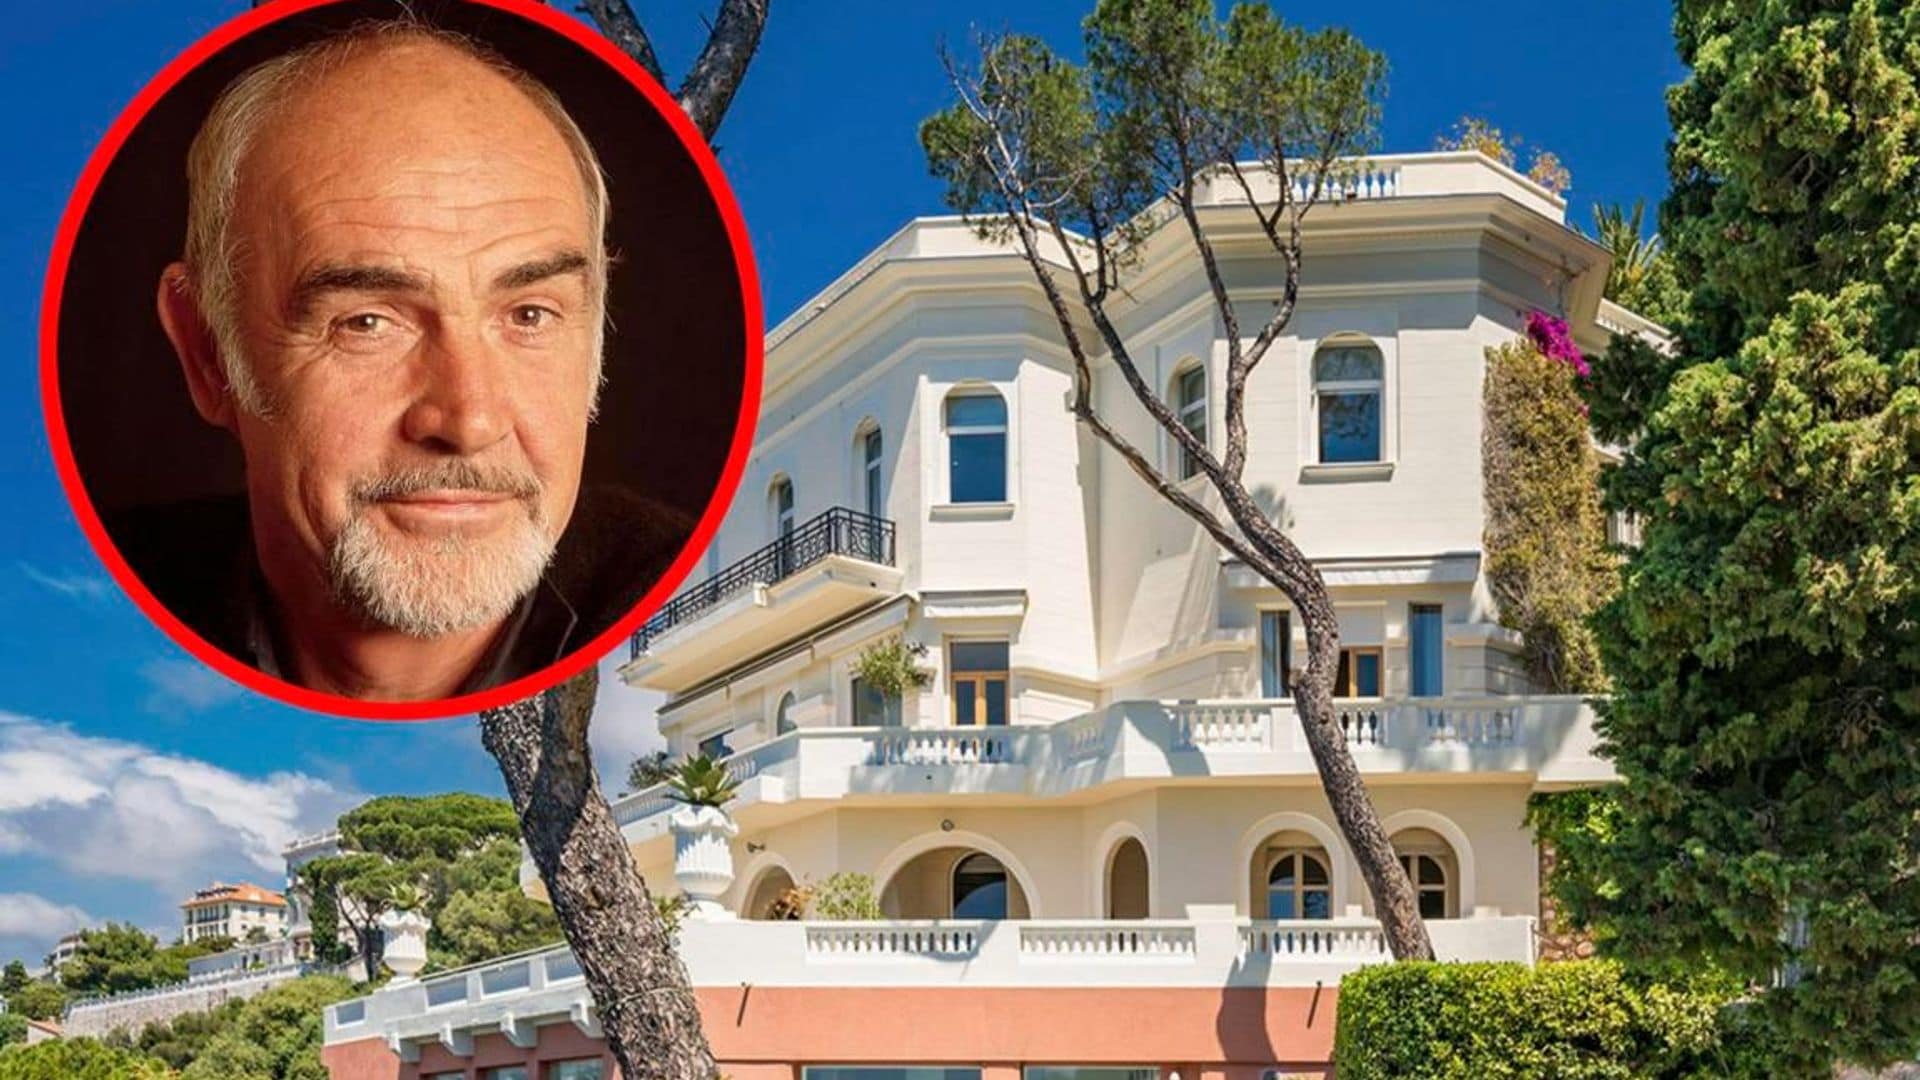 Sean Connery’s longtime home in South of France for sale with $34 million price tag